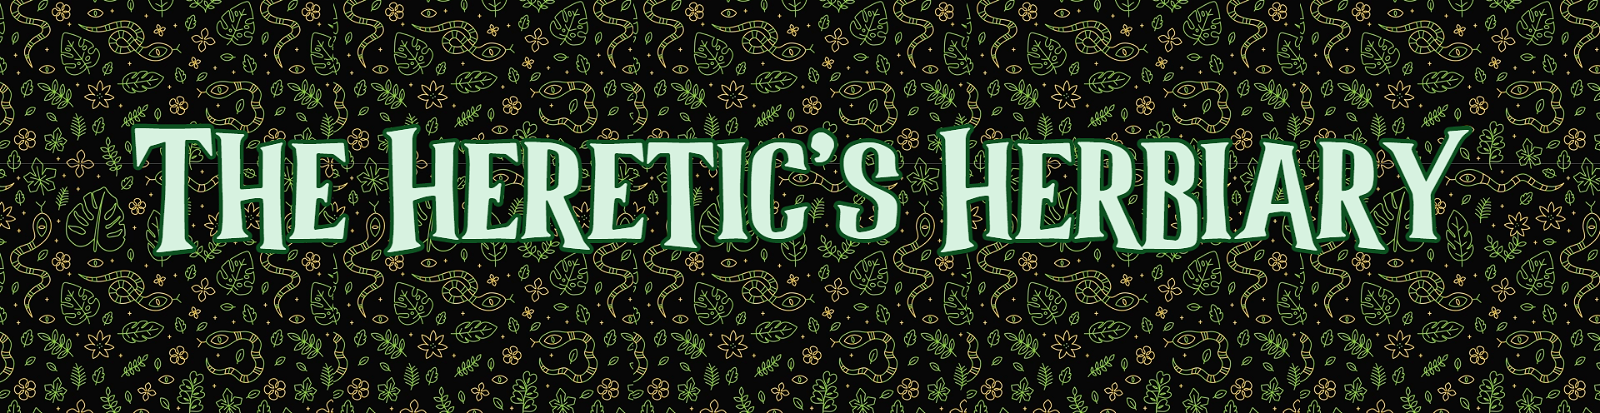 The Heretic's Herbiary vol #13